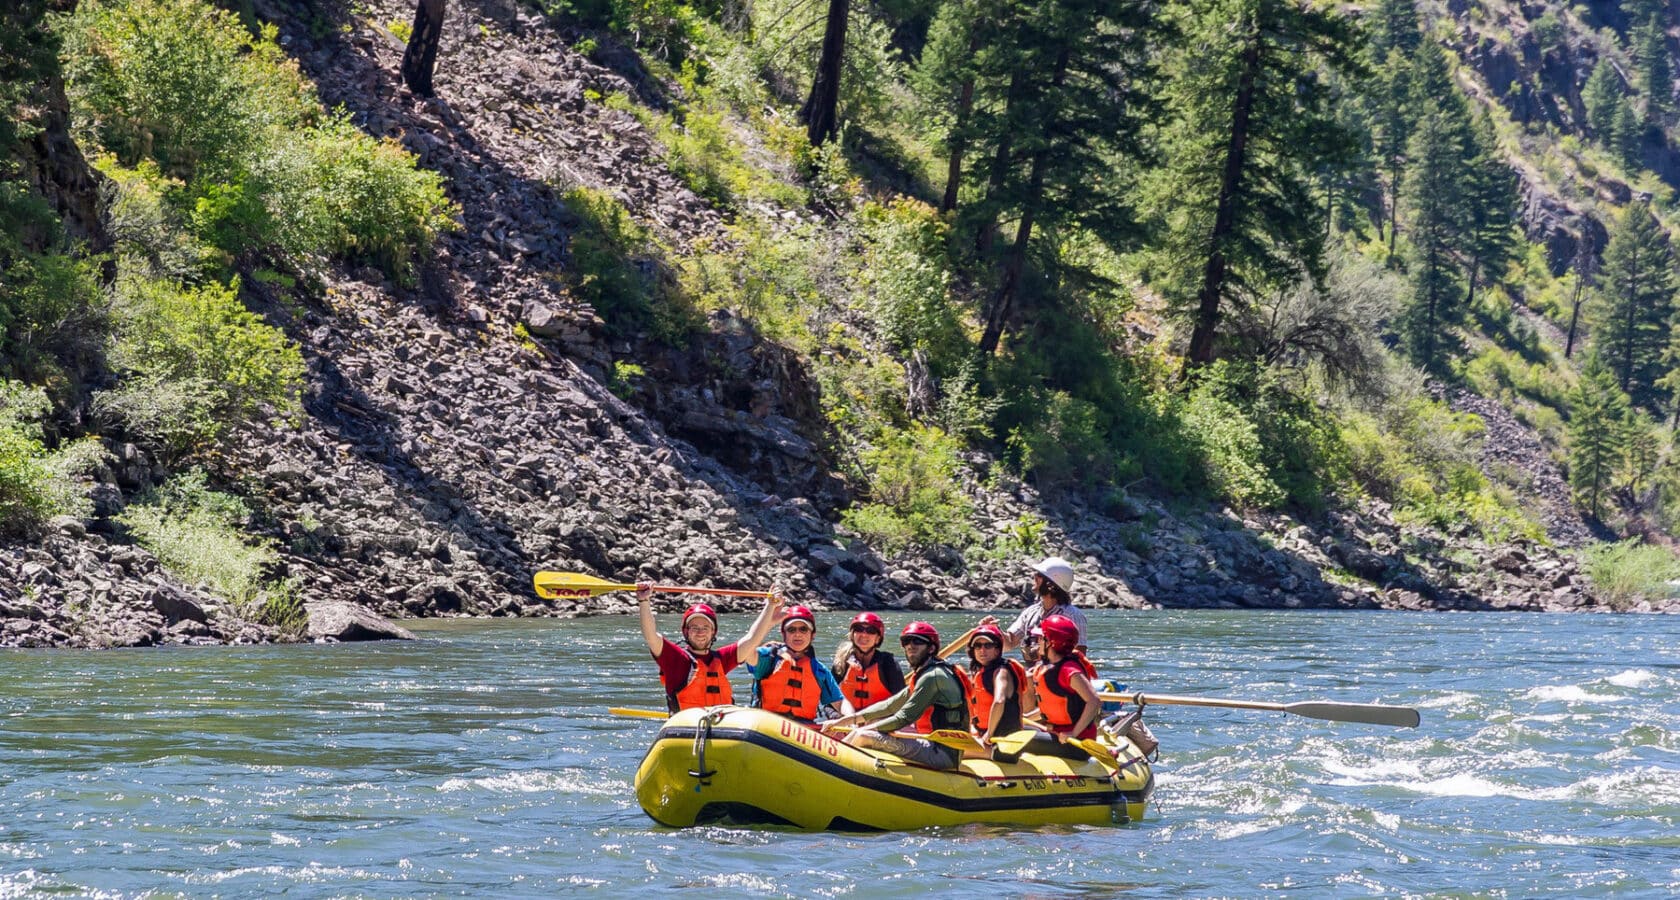 A group of people on a paddle raft on the Main Salmon River in Idaho.